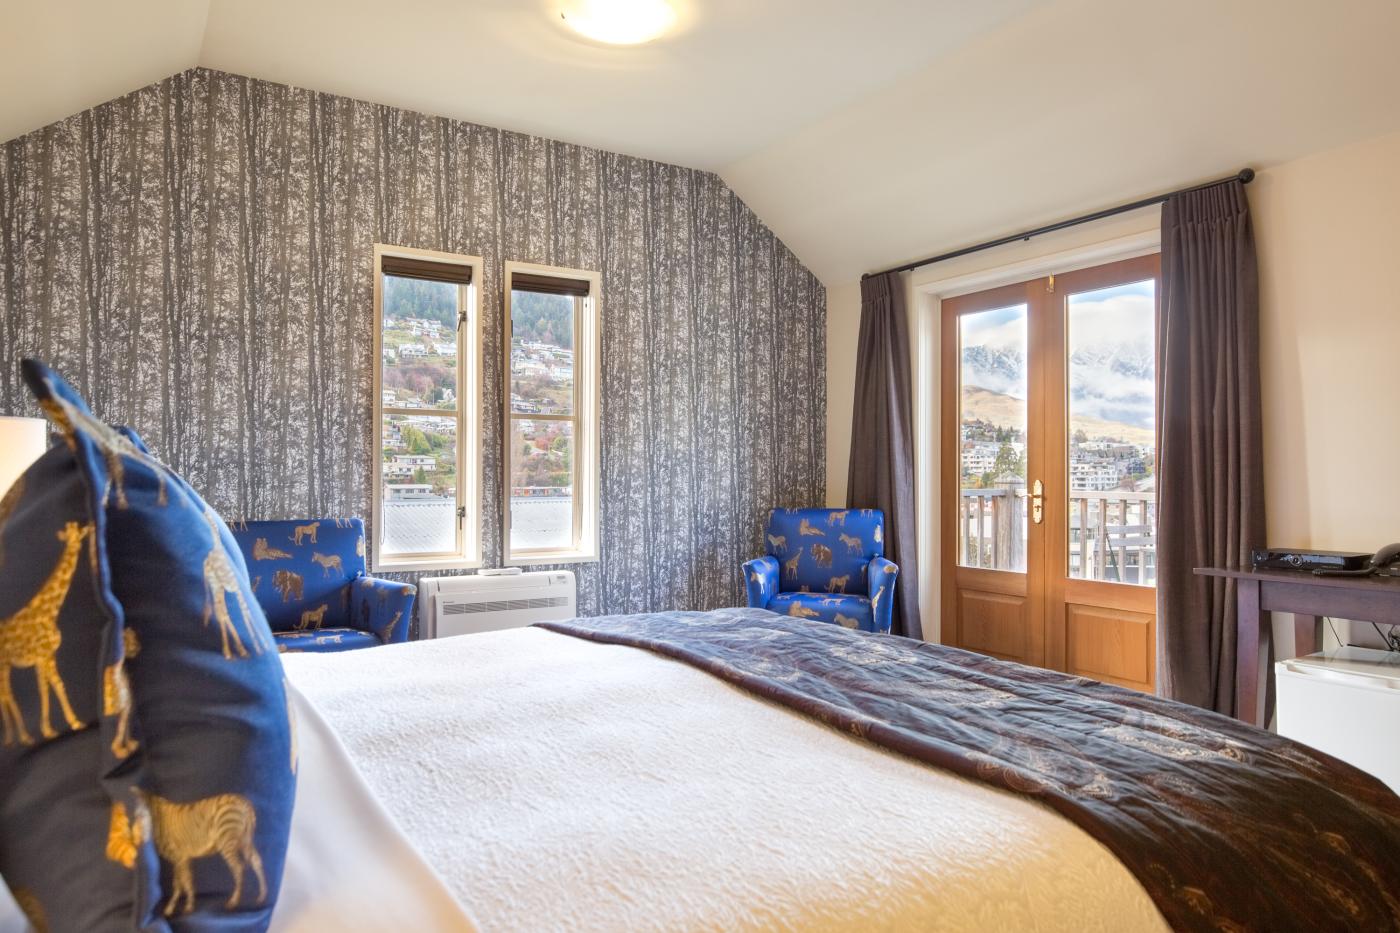 Cosy room at the The Dairy Private Hotel, with views of the Remarkables mountains covered in snow.